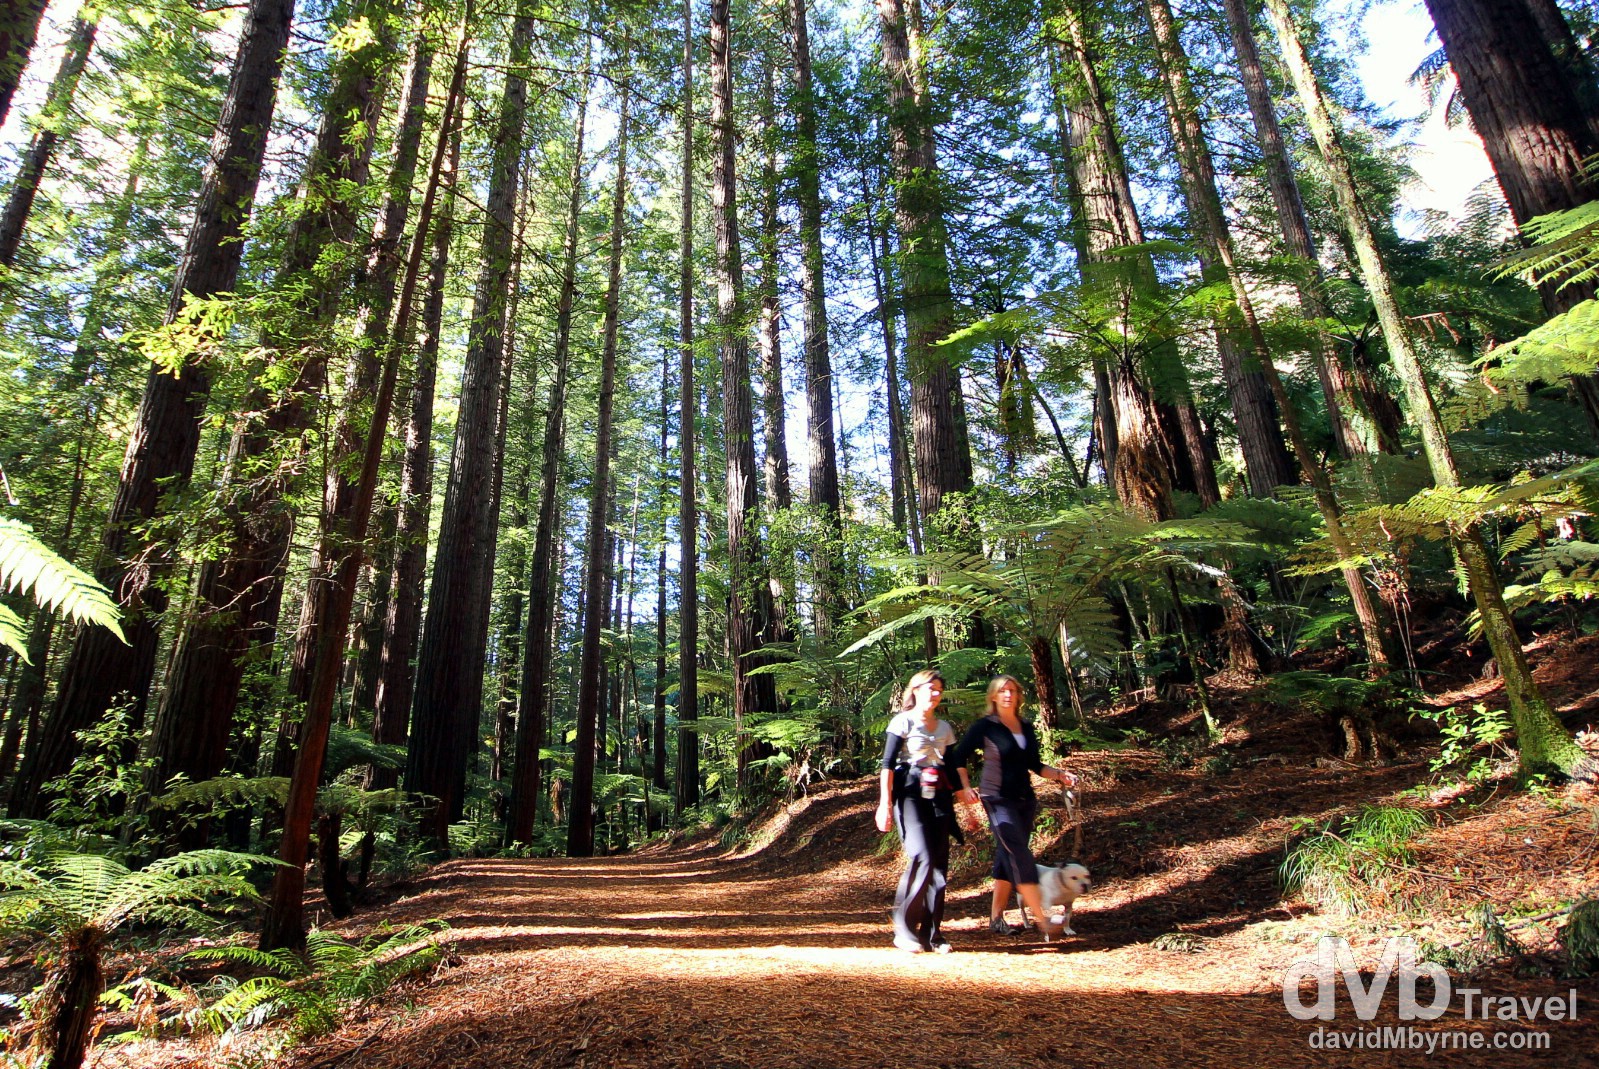 Taking a stroll in the Whakarewarewa Forest on the outskirts of Rotorua, North Island, New Zealand. May 6th 2012.